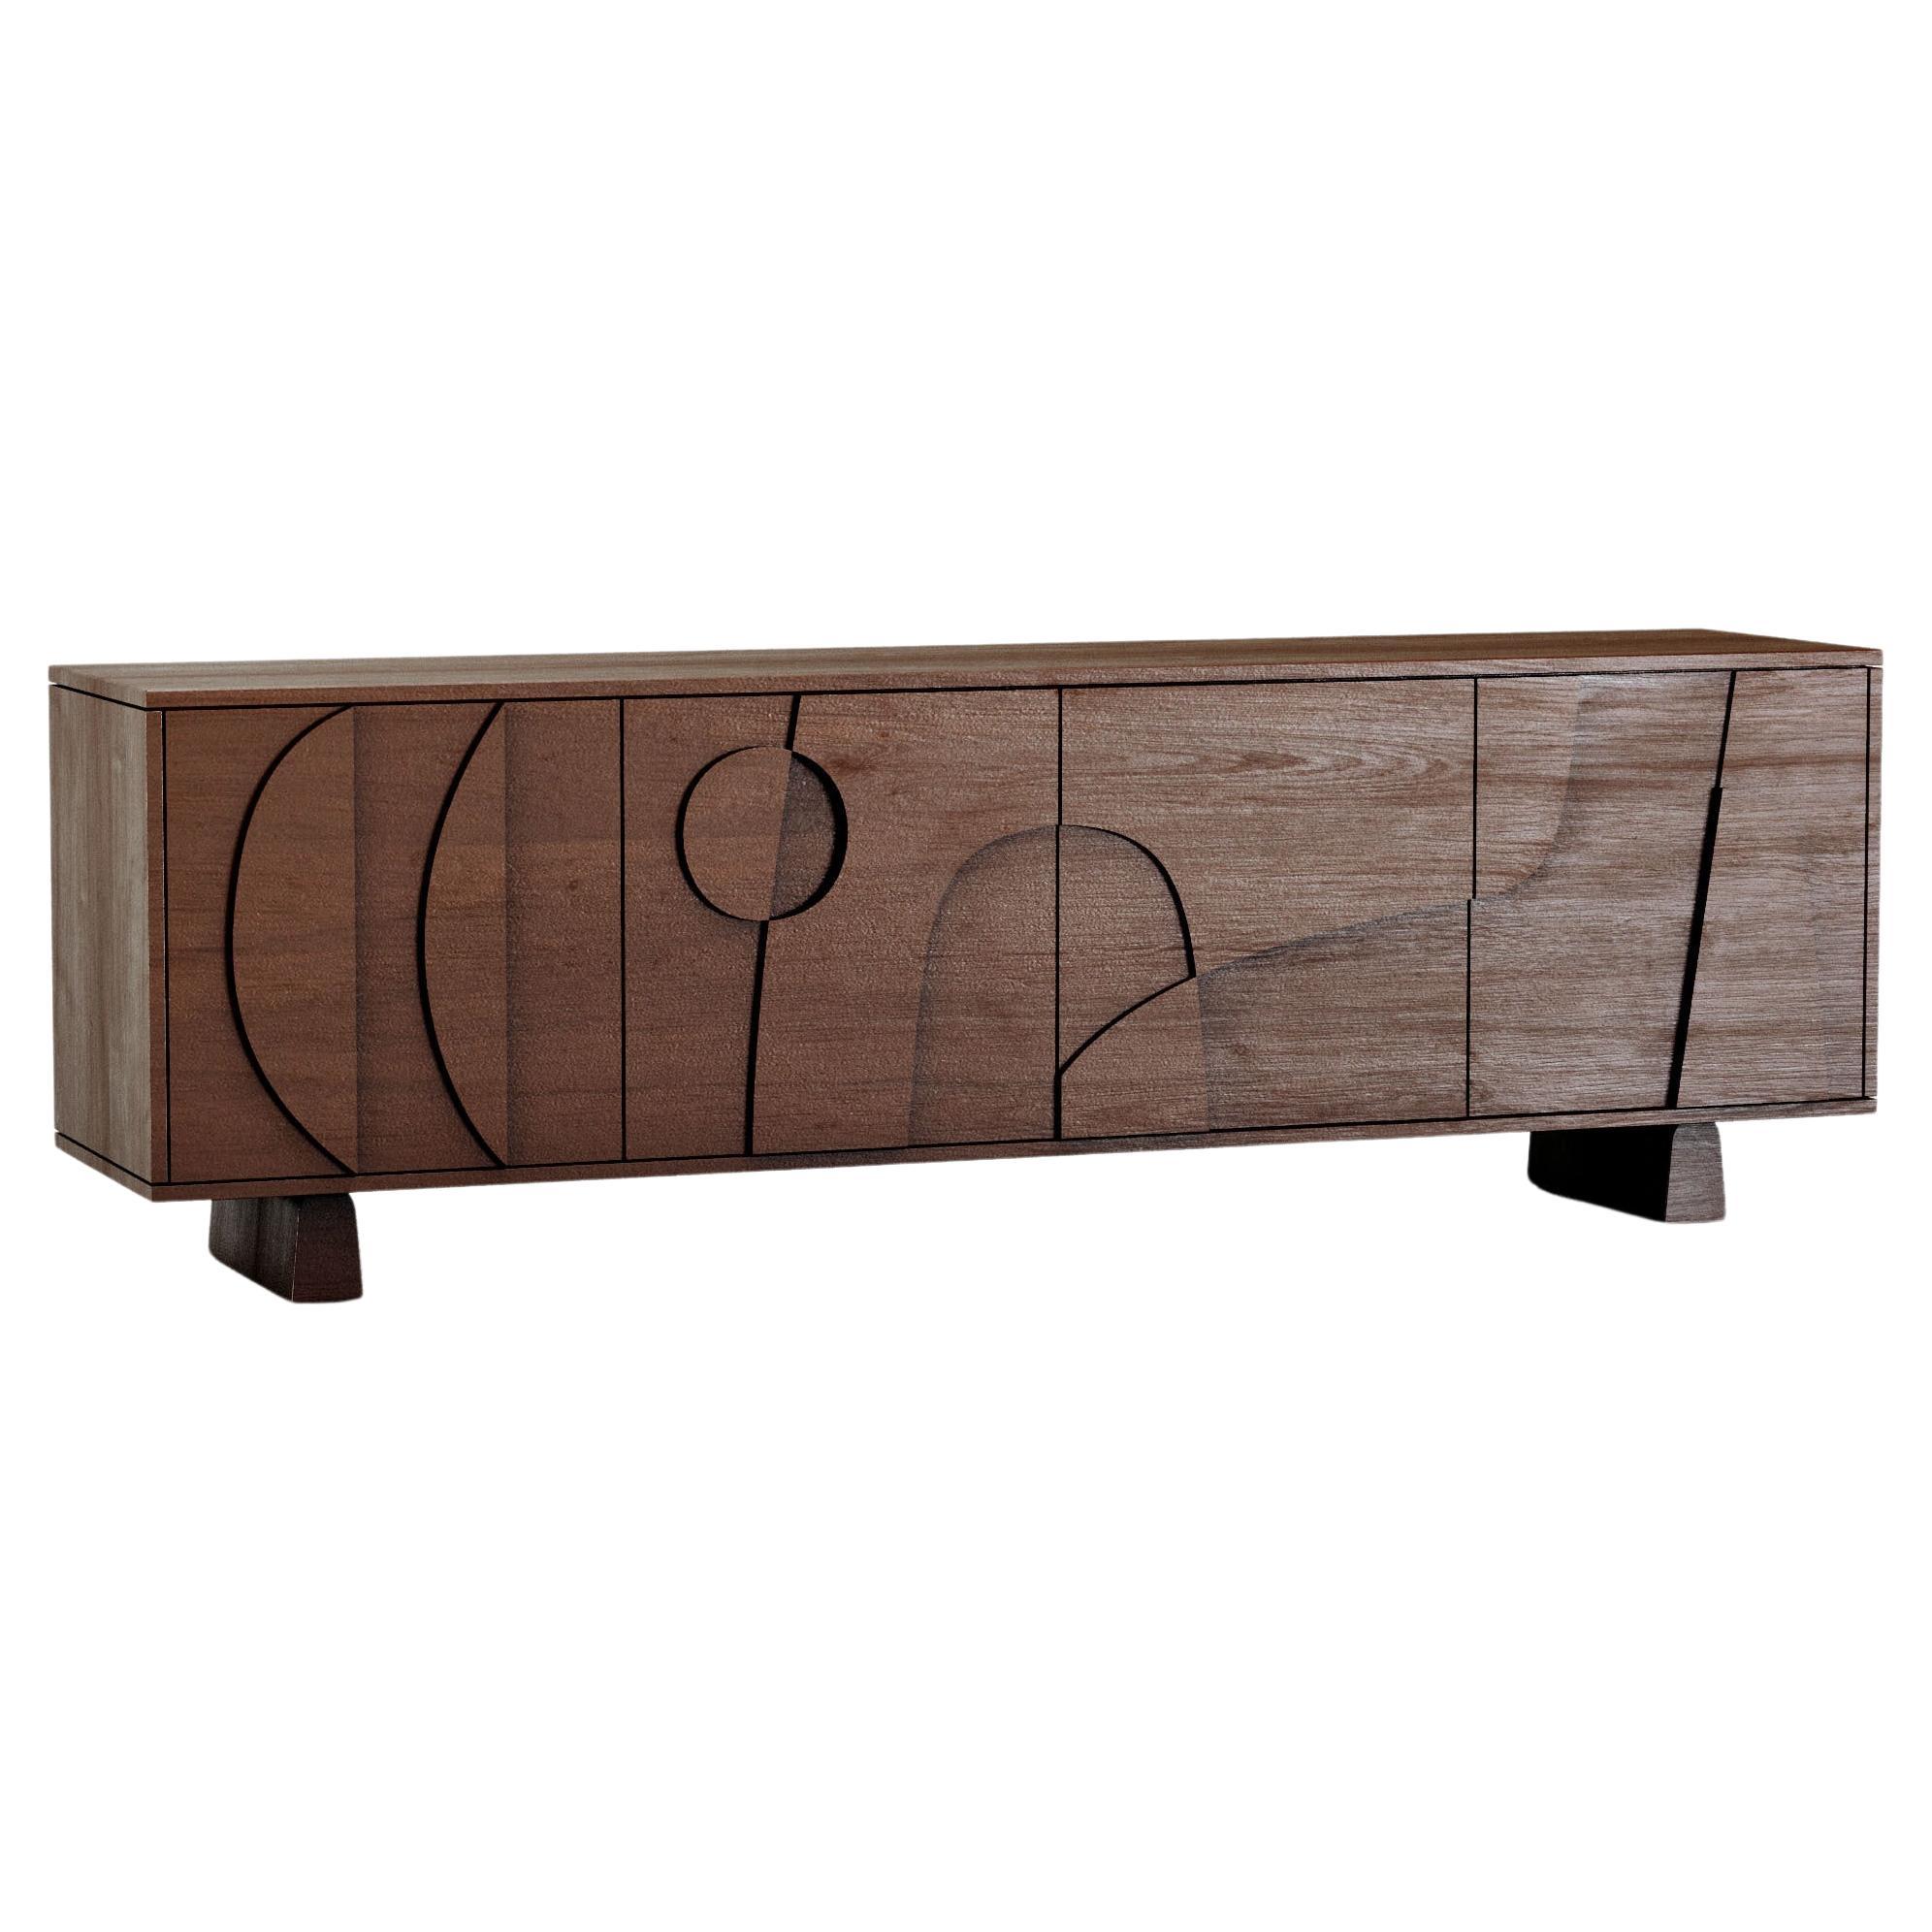 Contemporary 'Wynwood' 4 Sideboard by Man of Parts, Whiskey Oak, Short Legs For Sale